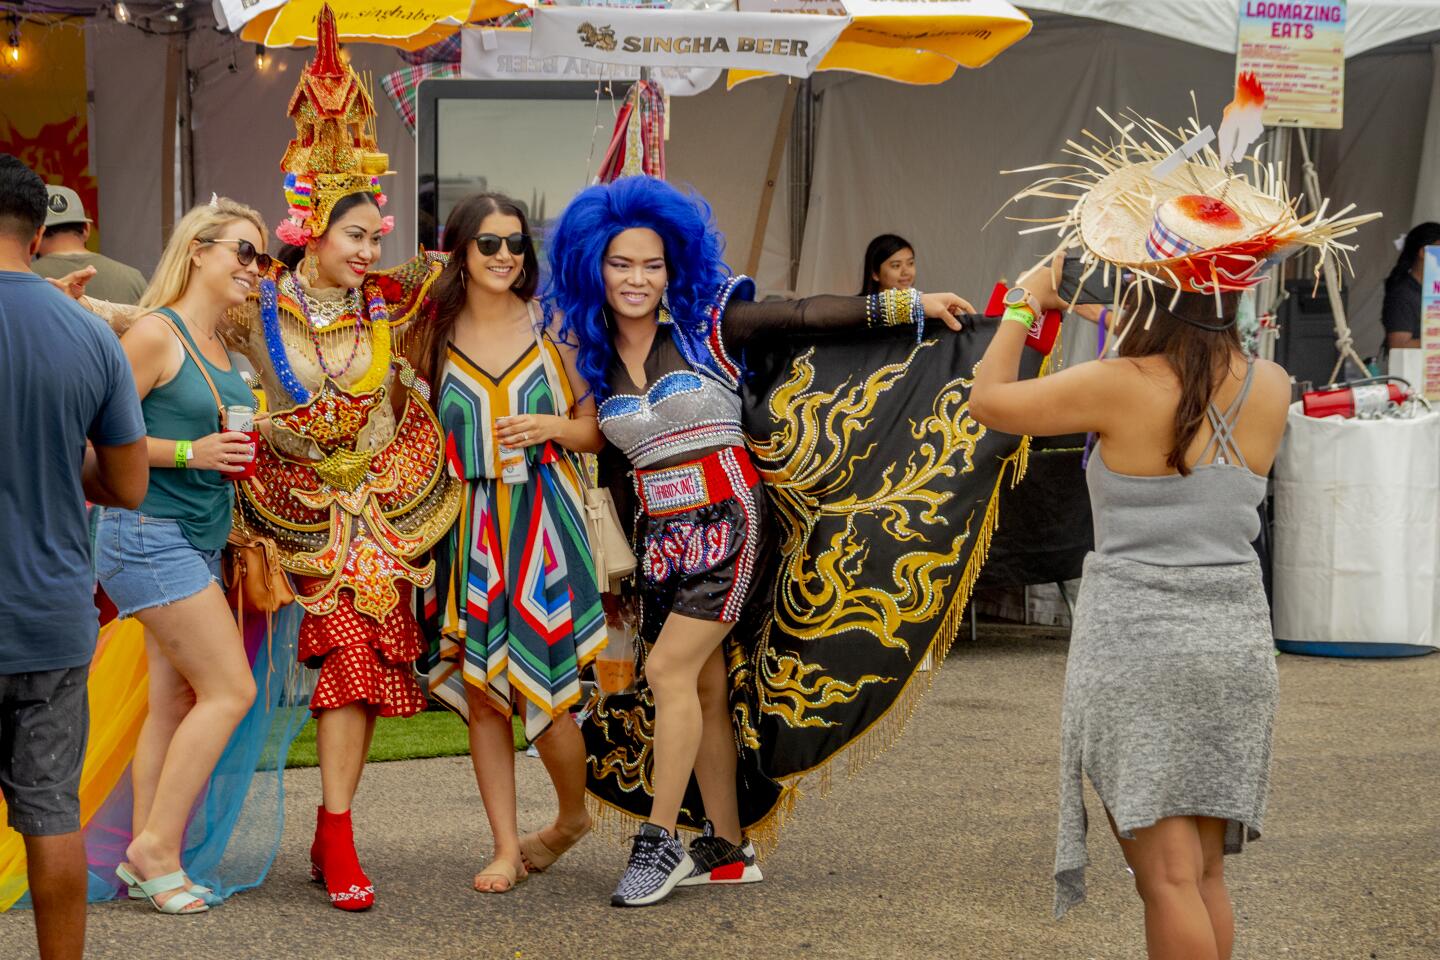 Boom Wanrisa, second from left in a Thai temple dress, joins Tatar Watcharin in her blue wig in posing with customers at Farmhouse Kitchen at the Nood Beach festival Sunday in Huntington Beach.